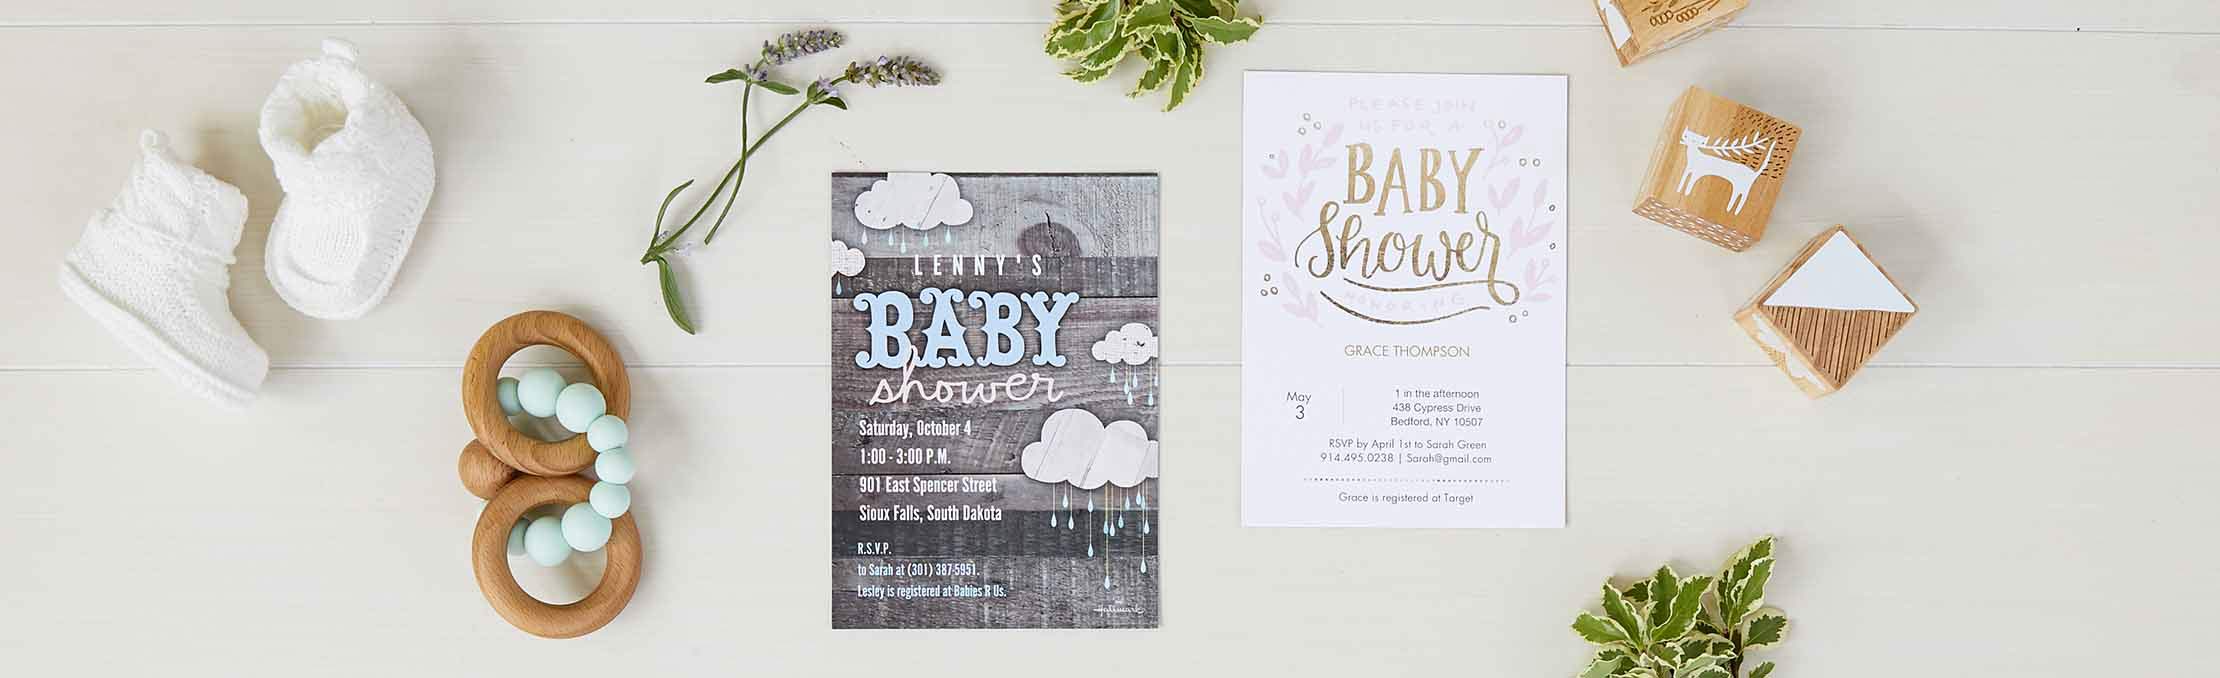 How to Word Invitations for Baby Shower for Boys, Girls and Twins